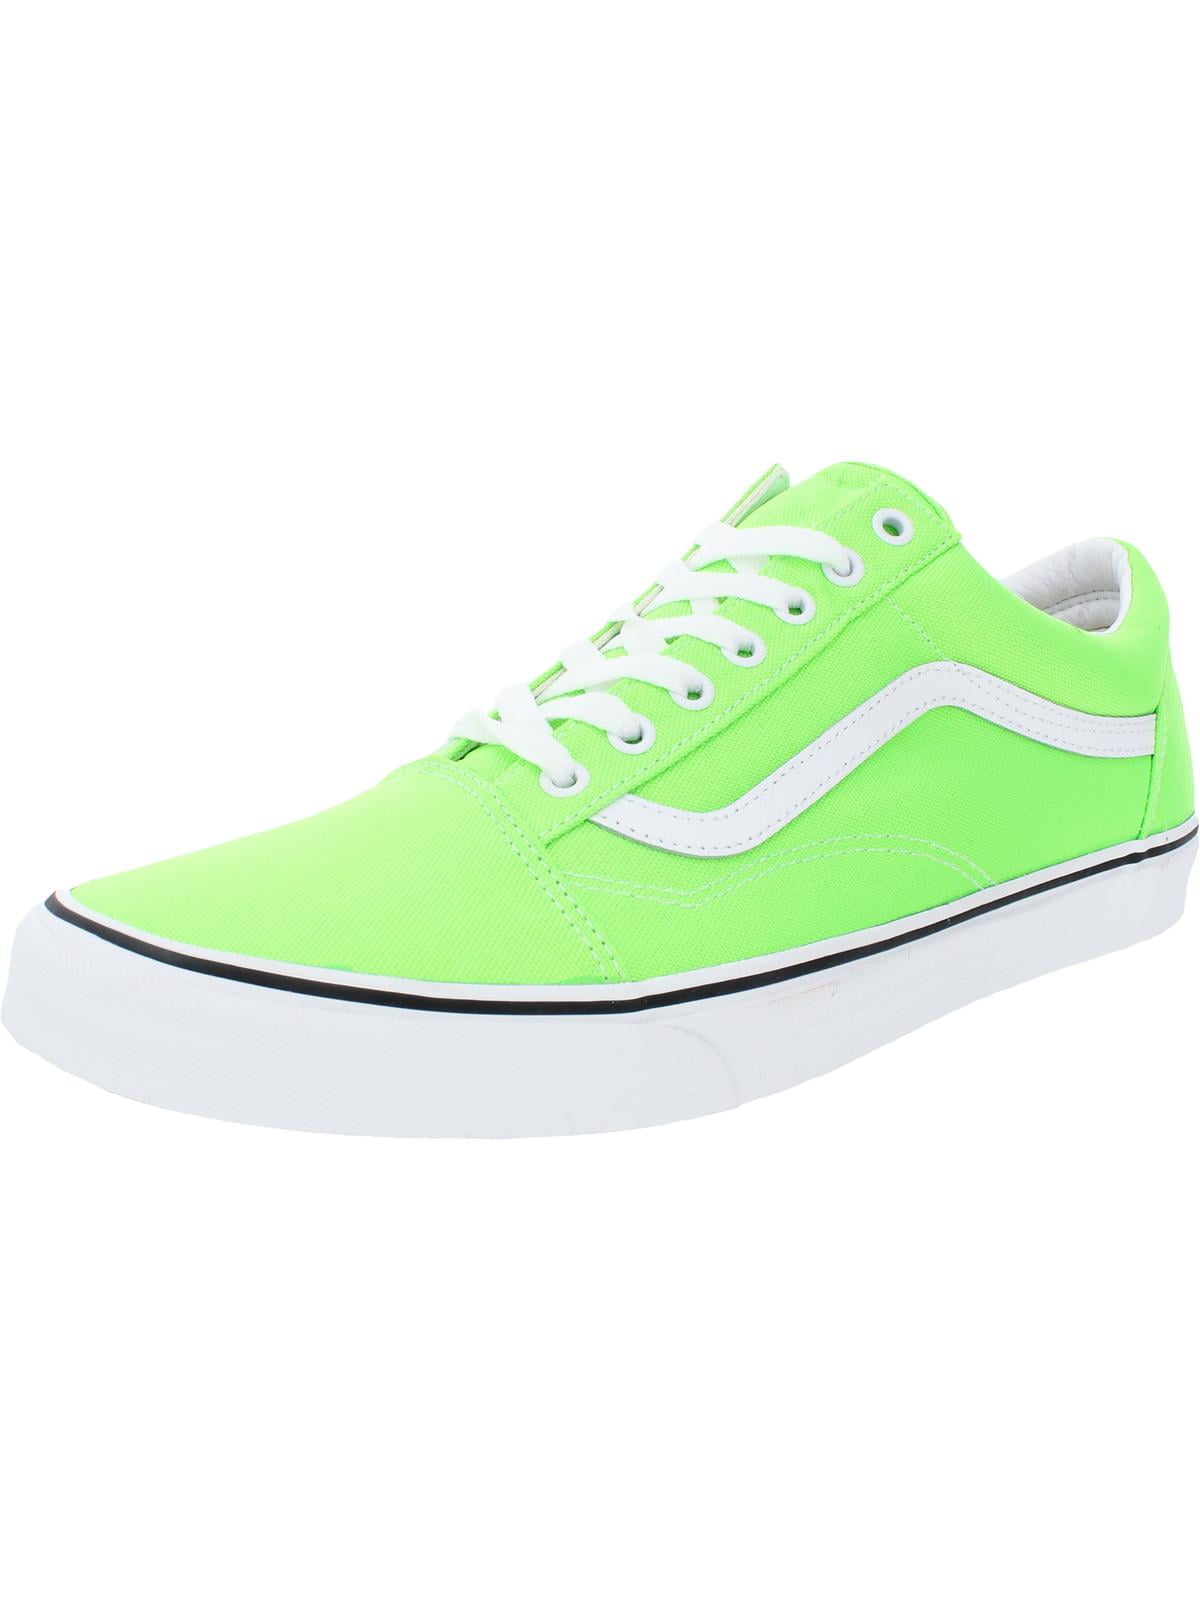 cool neon vans shoes for girls